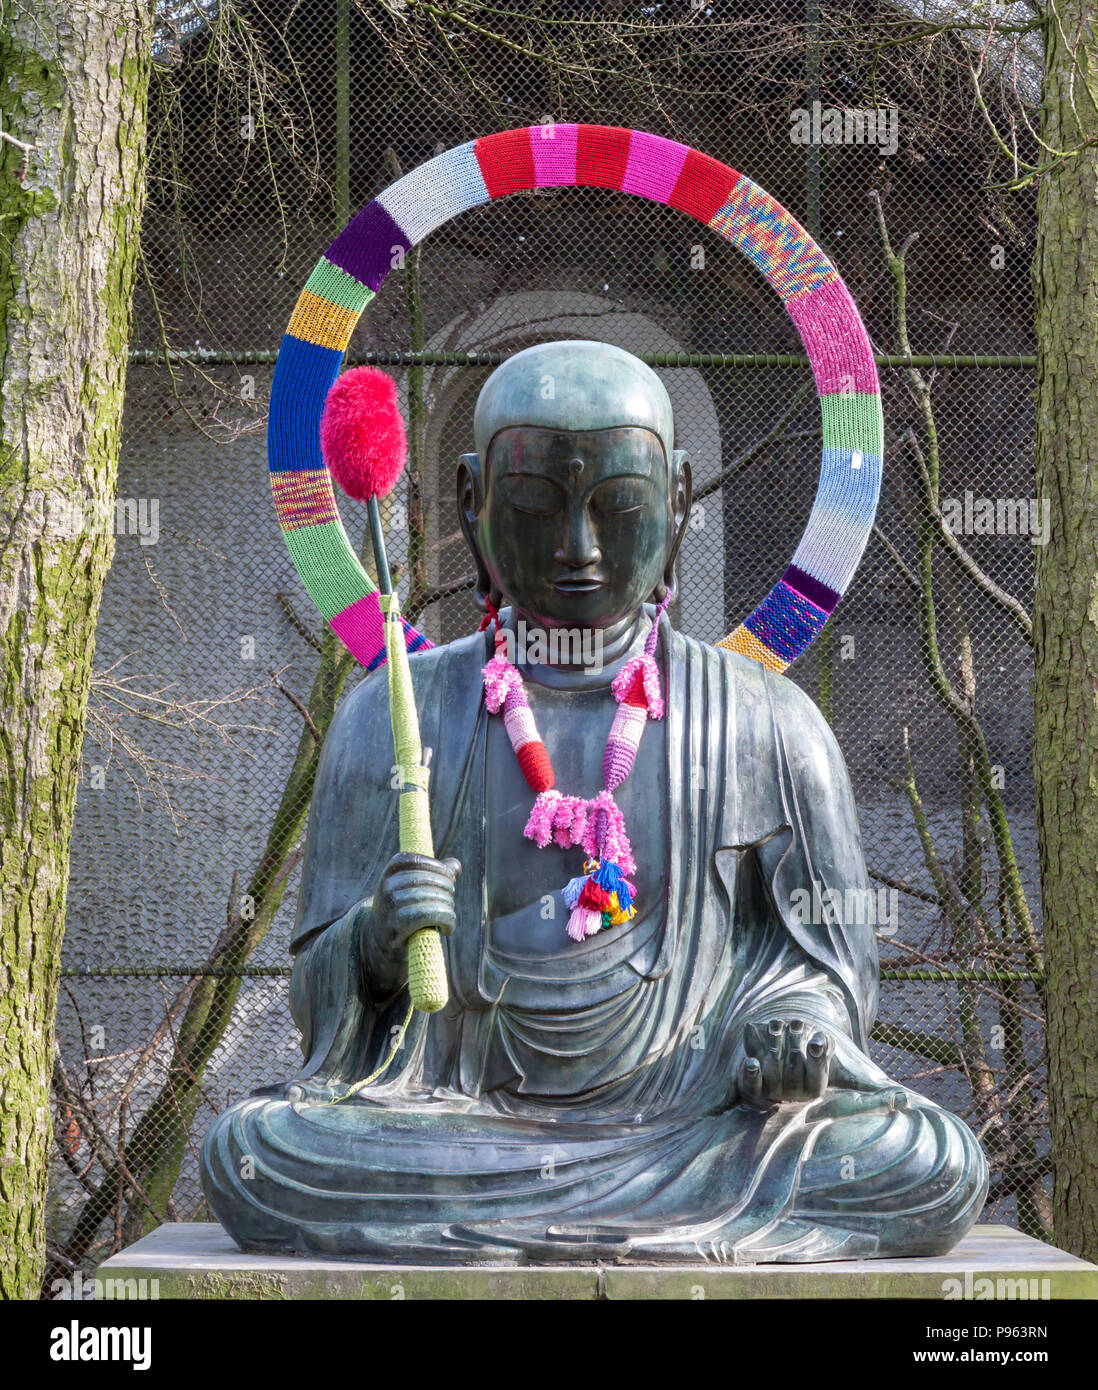 Buddha bronze Statue decorated with wool from a yarn-bombing in Amsterdam, The Netherlands Stock Photo